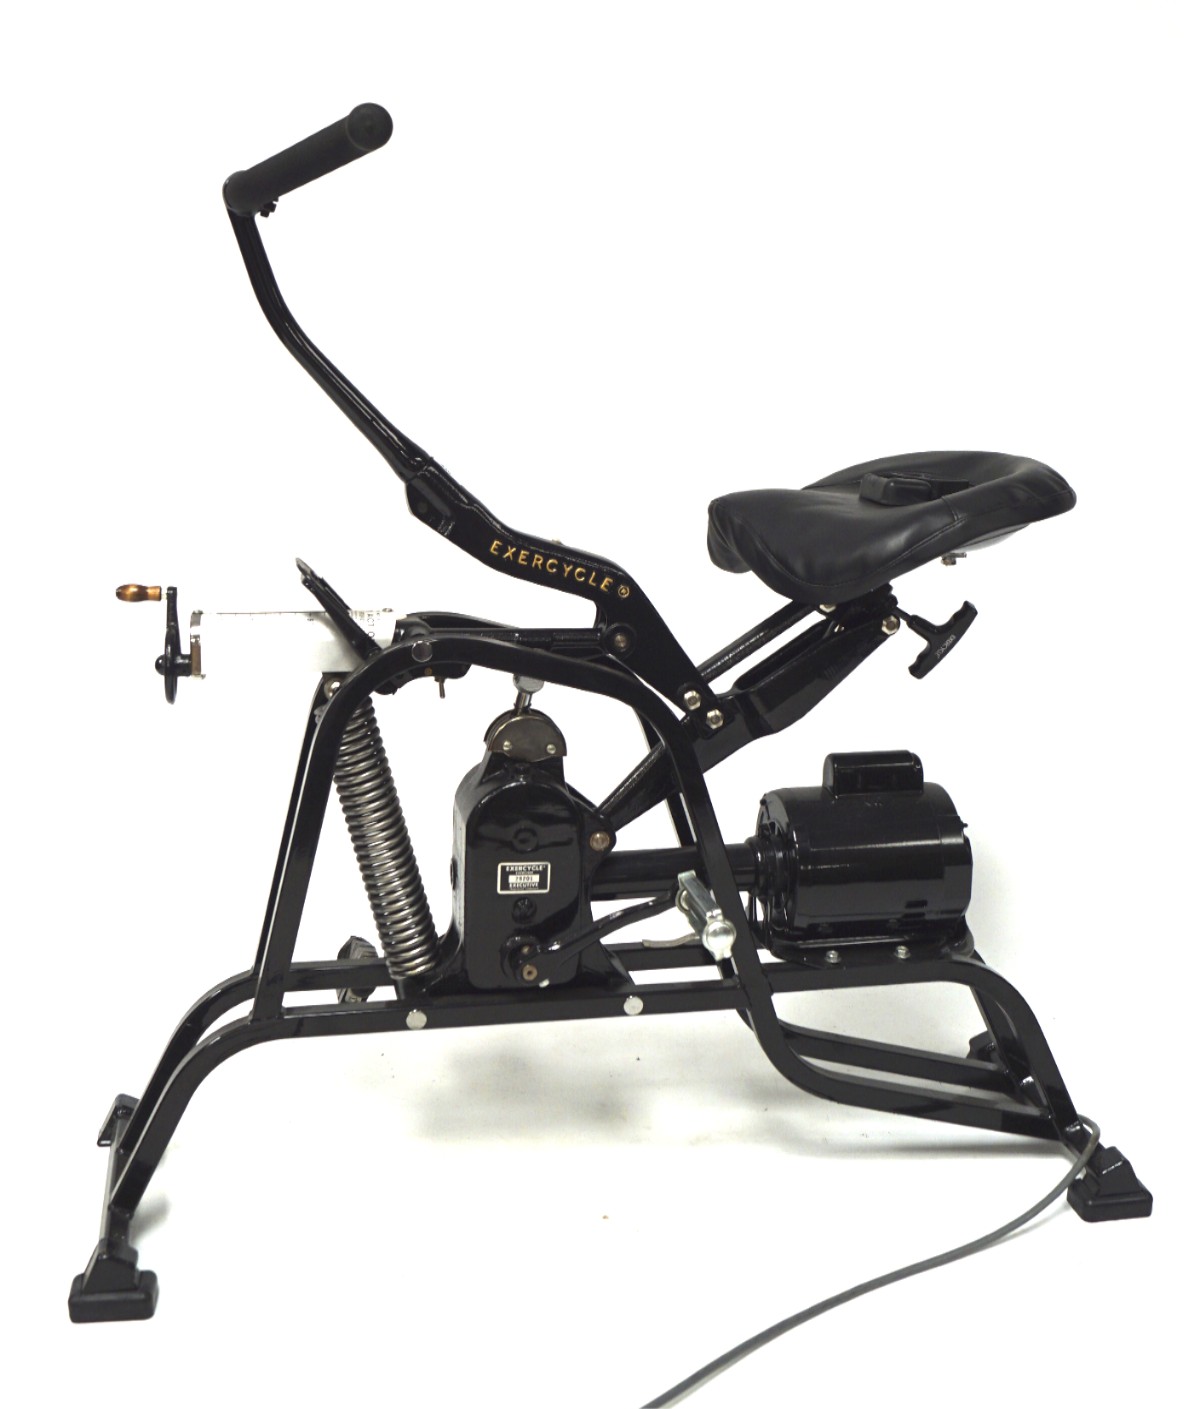 A vintage mid-century Exercycle Exerciser stationary exercise bike.